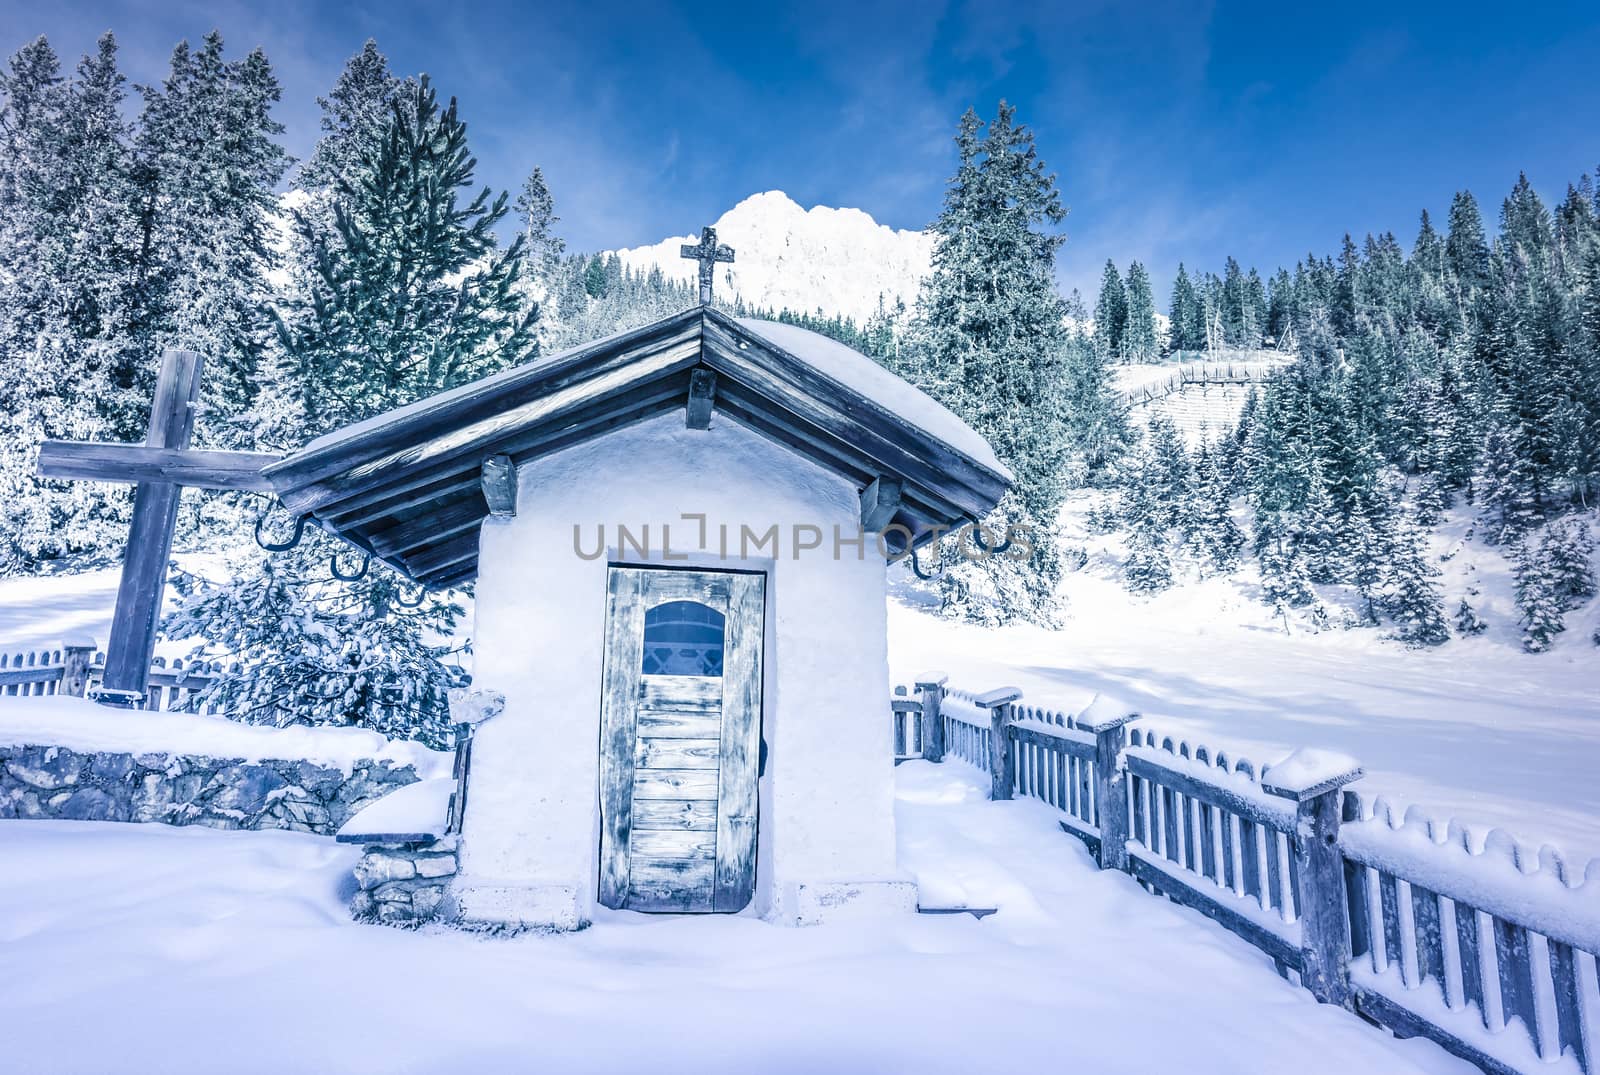 Picturesque snowy scenery in the Austrian Alps with an old chapel  surrounded by an aged wooden fence, a fir forest and mountain peaks covered in snow.